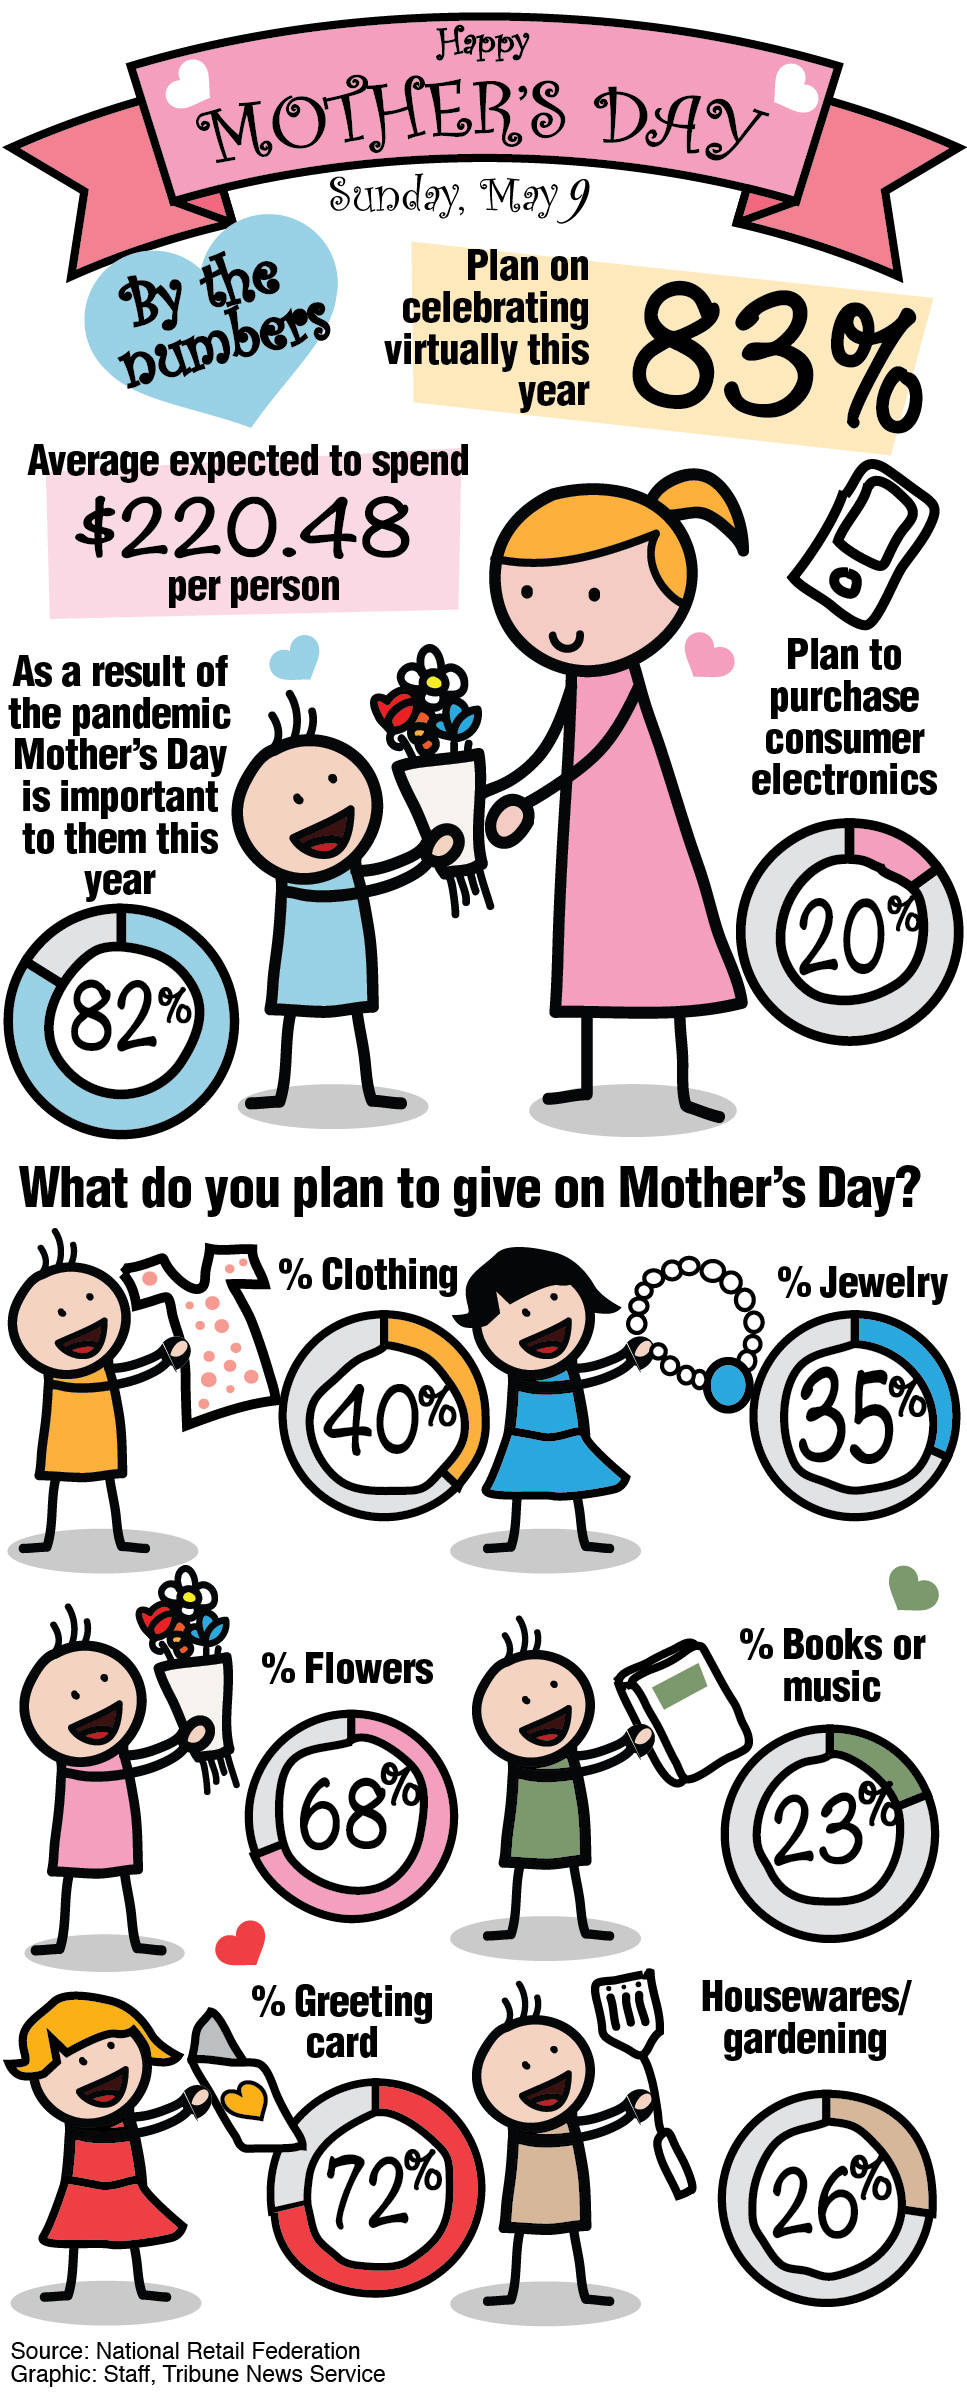 Infographic on Mother's Day by the numbers.